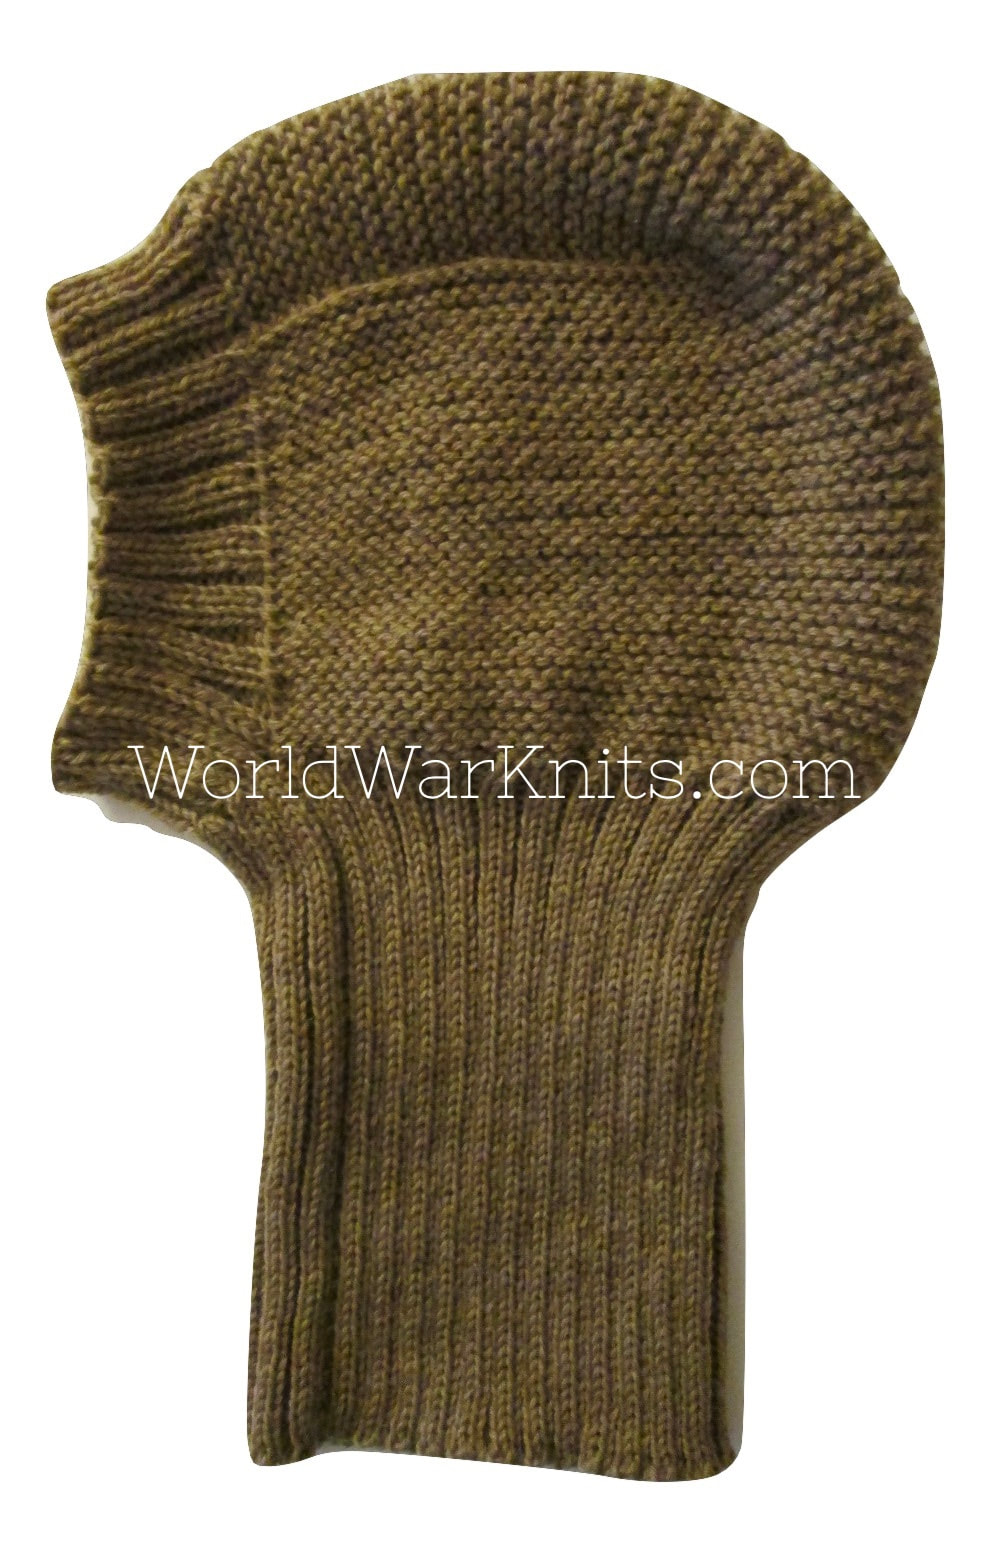 Great War knit and crochet reproductions for reenacting and living